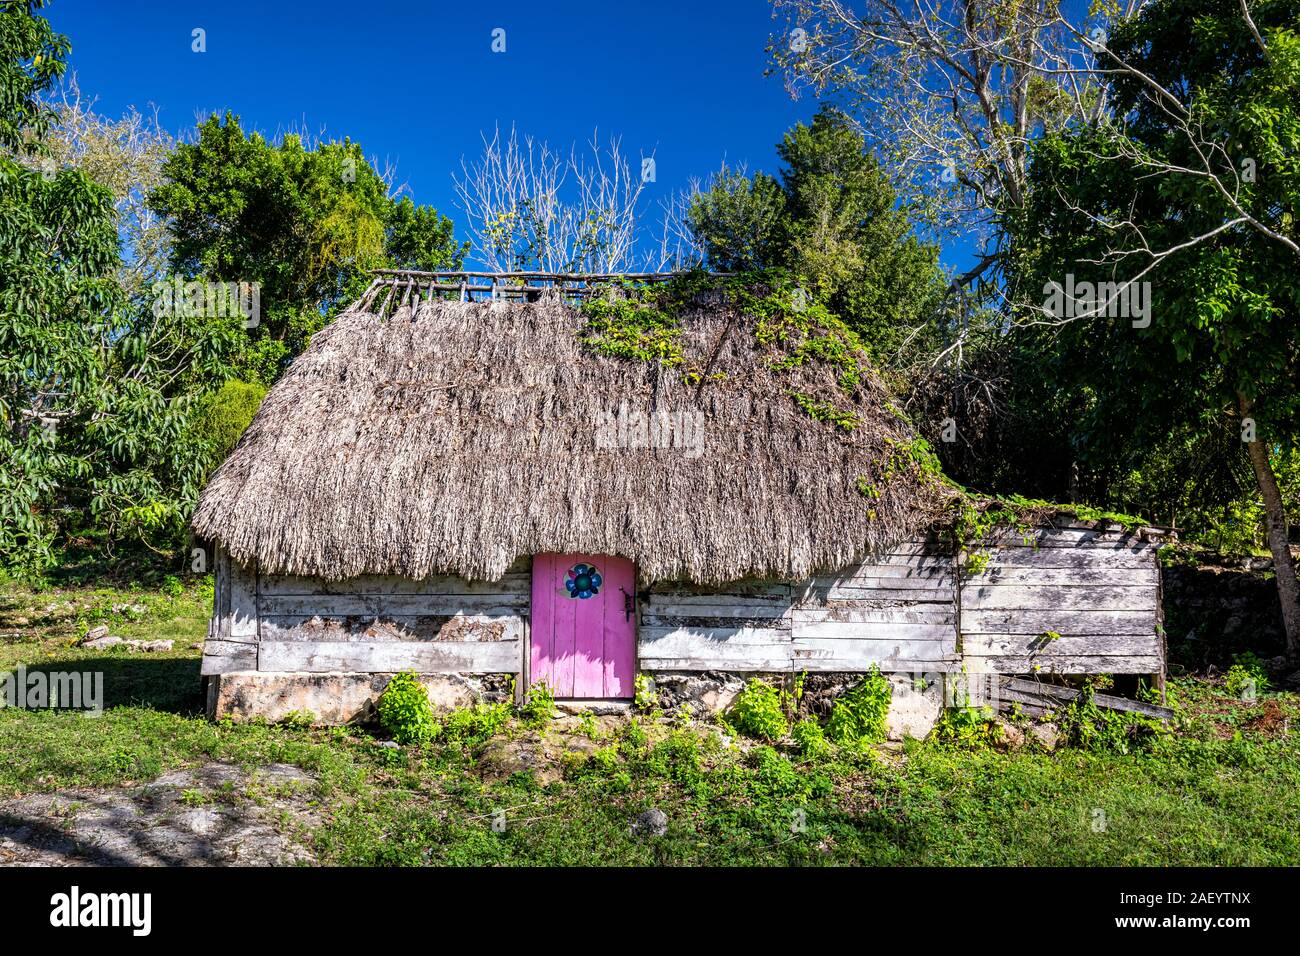 A thatched roof home in the colorful village of Chaacchoben, Quintana Roo, Mexico. Stock Photo